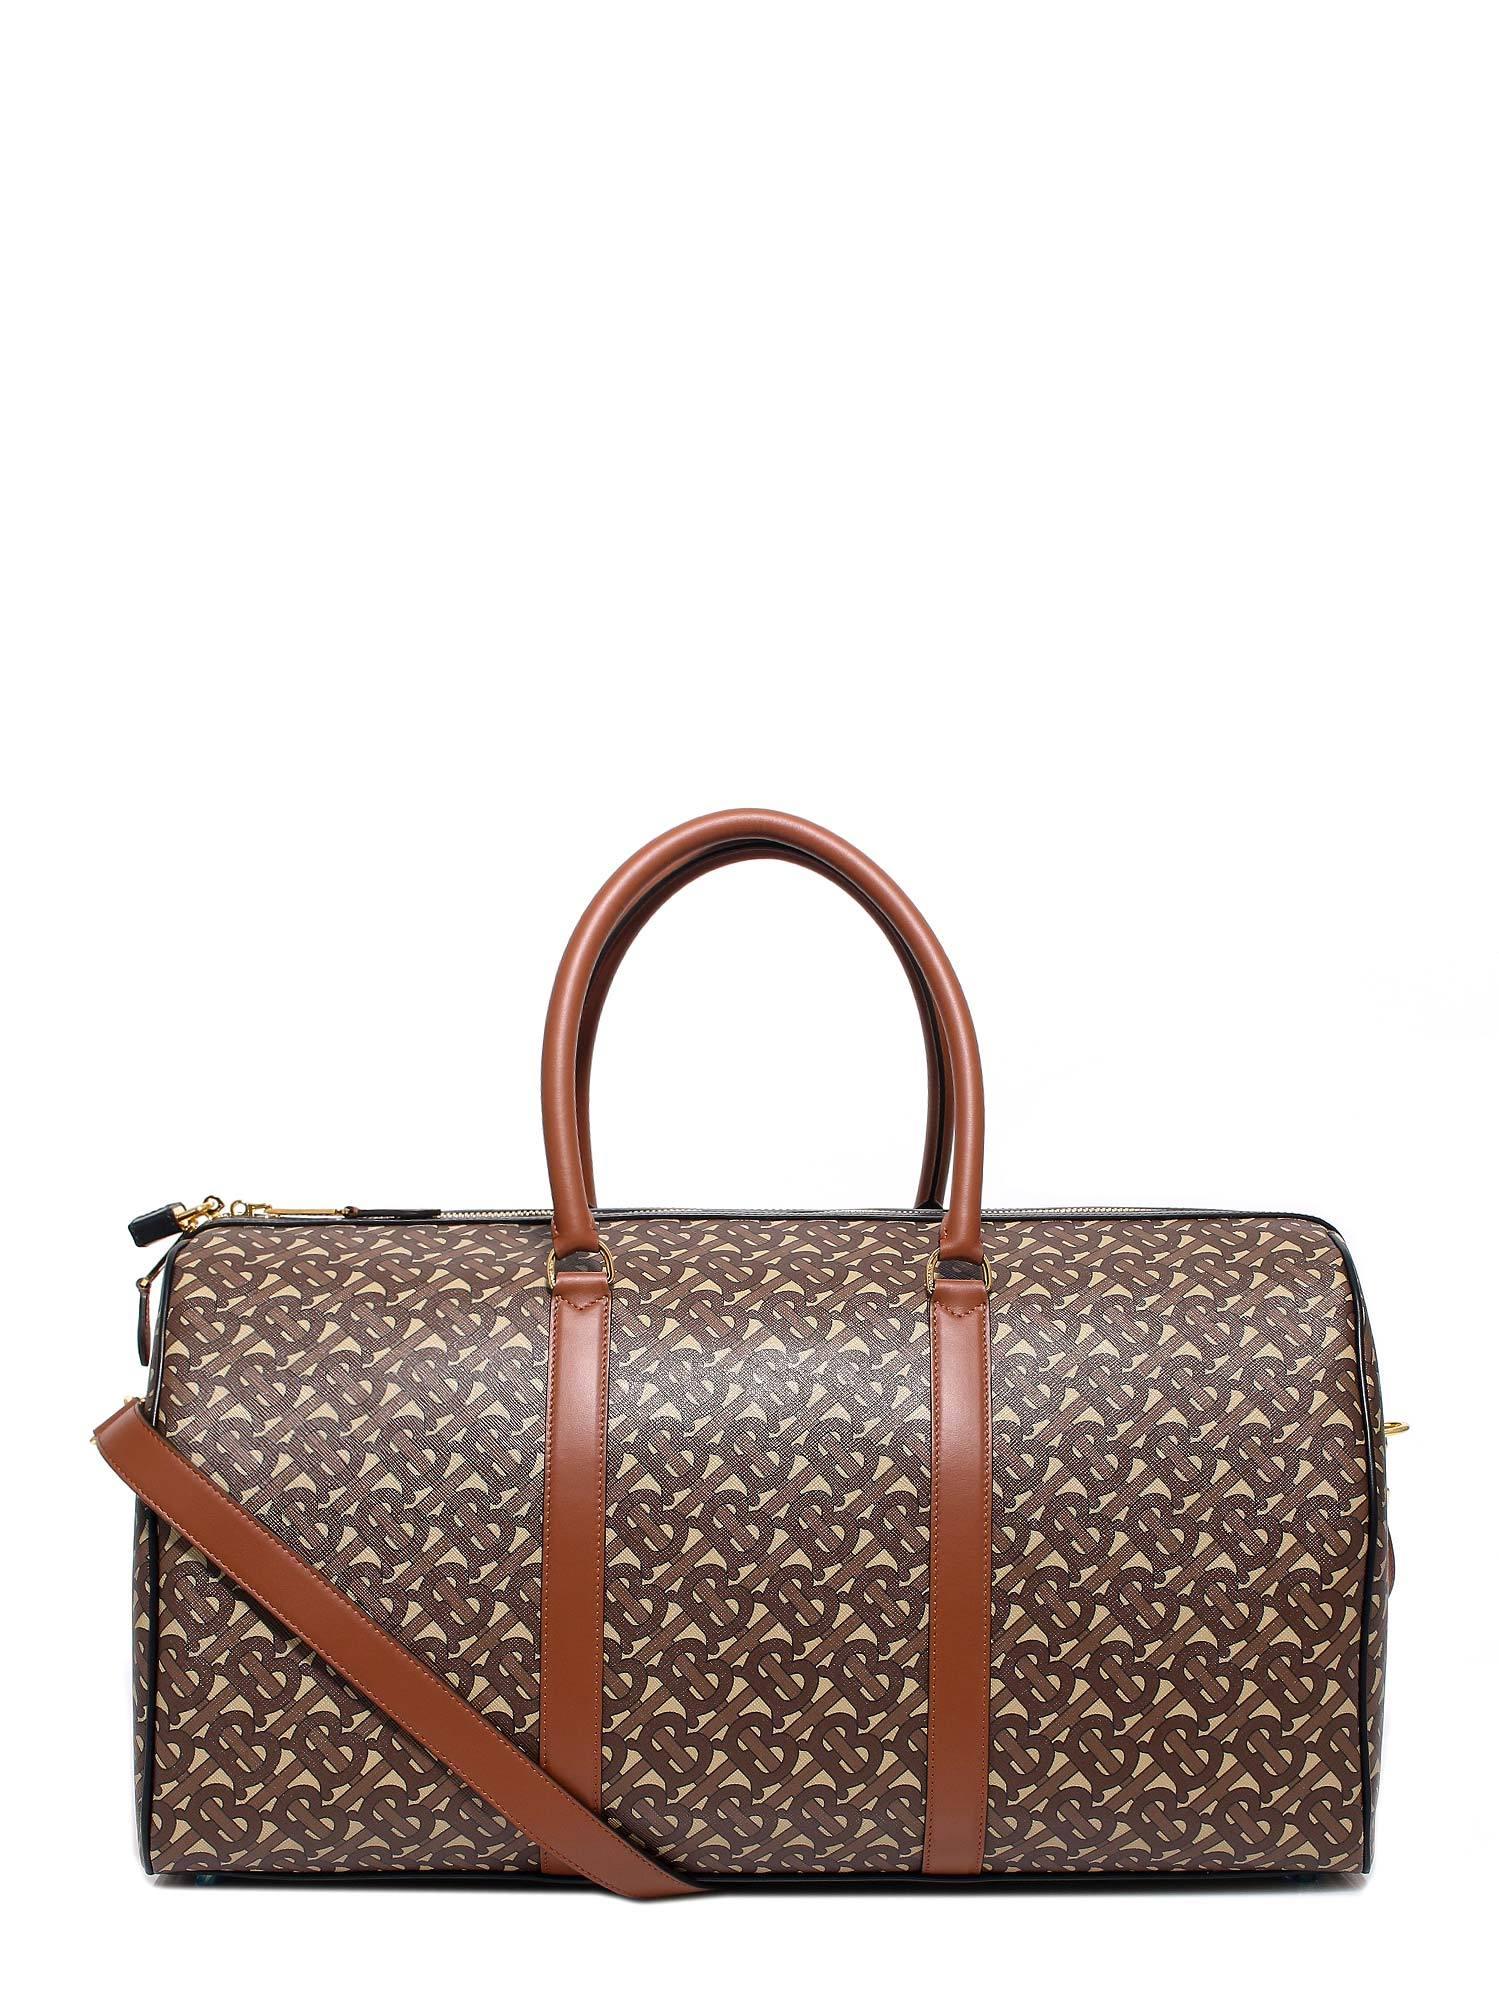 Burberry Leather Monogram Printed Duffle Bag in Brown for Men - Lyst